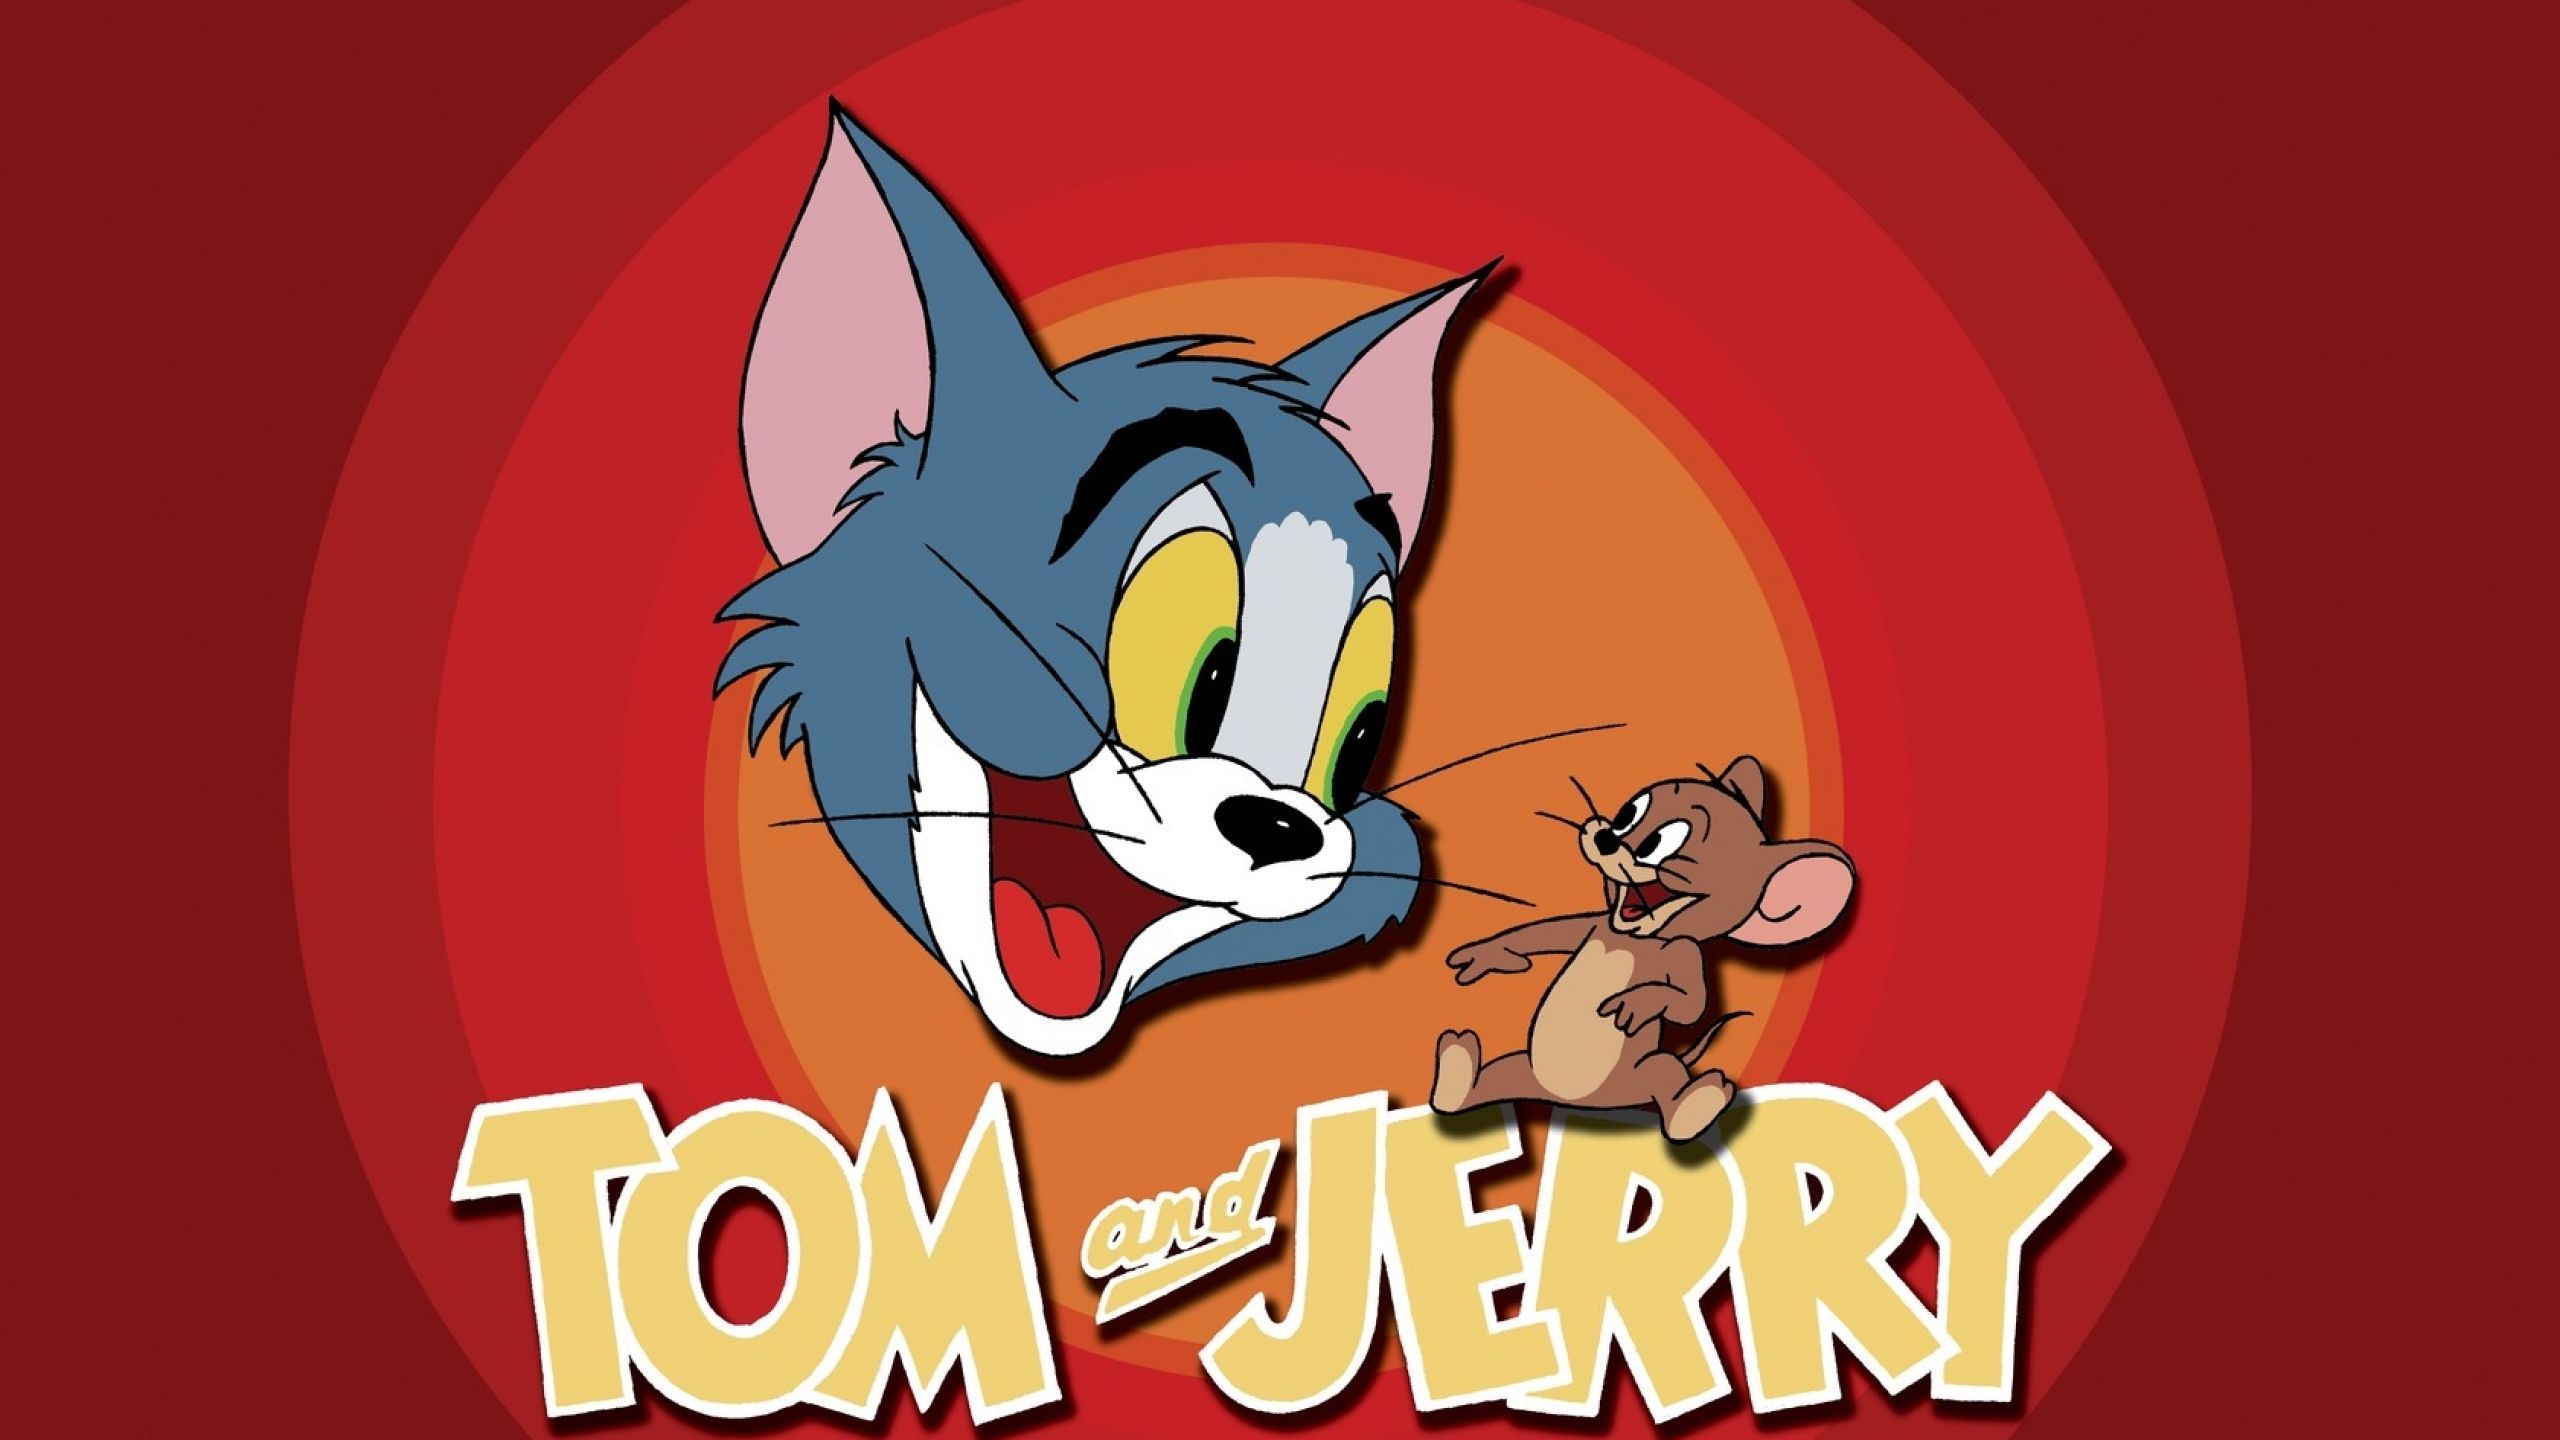 Tom and jerry  Kho hình nền Blinding  Wallpapers  Facebook